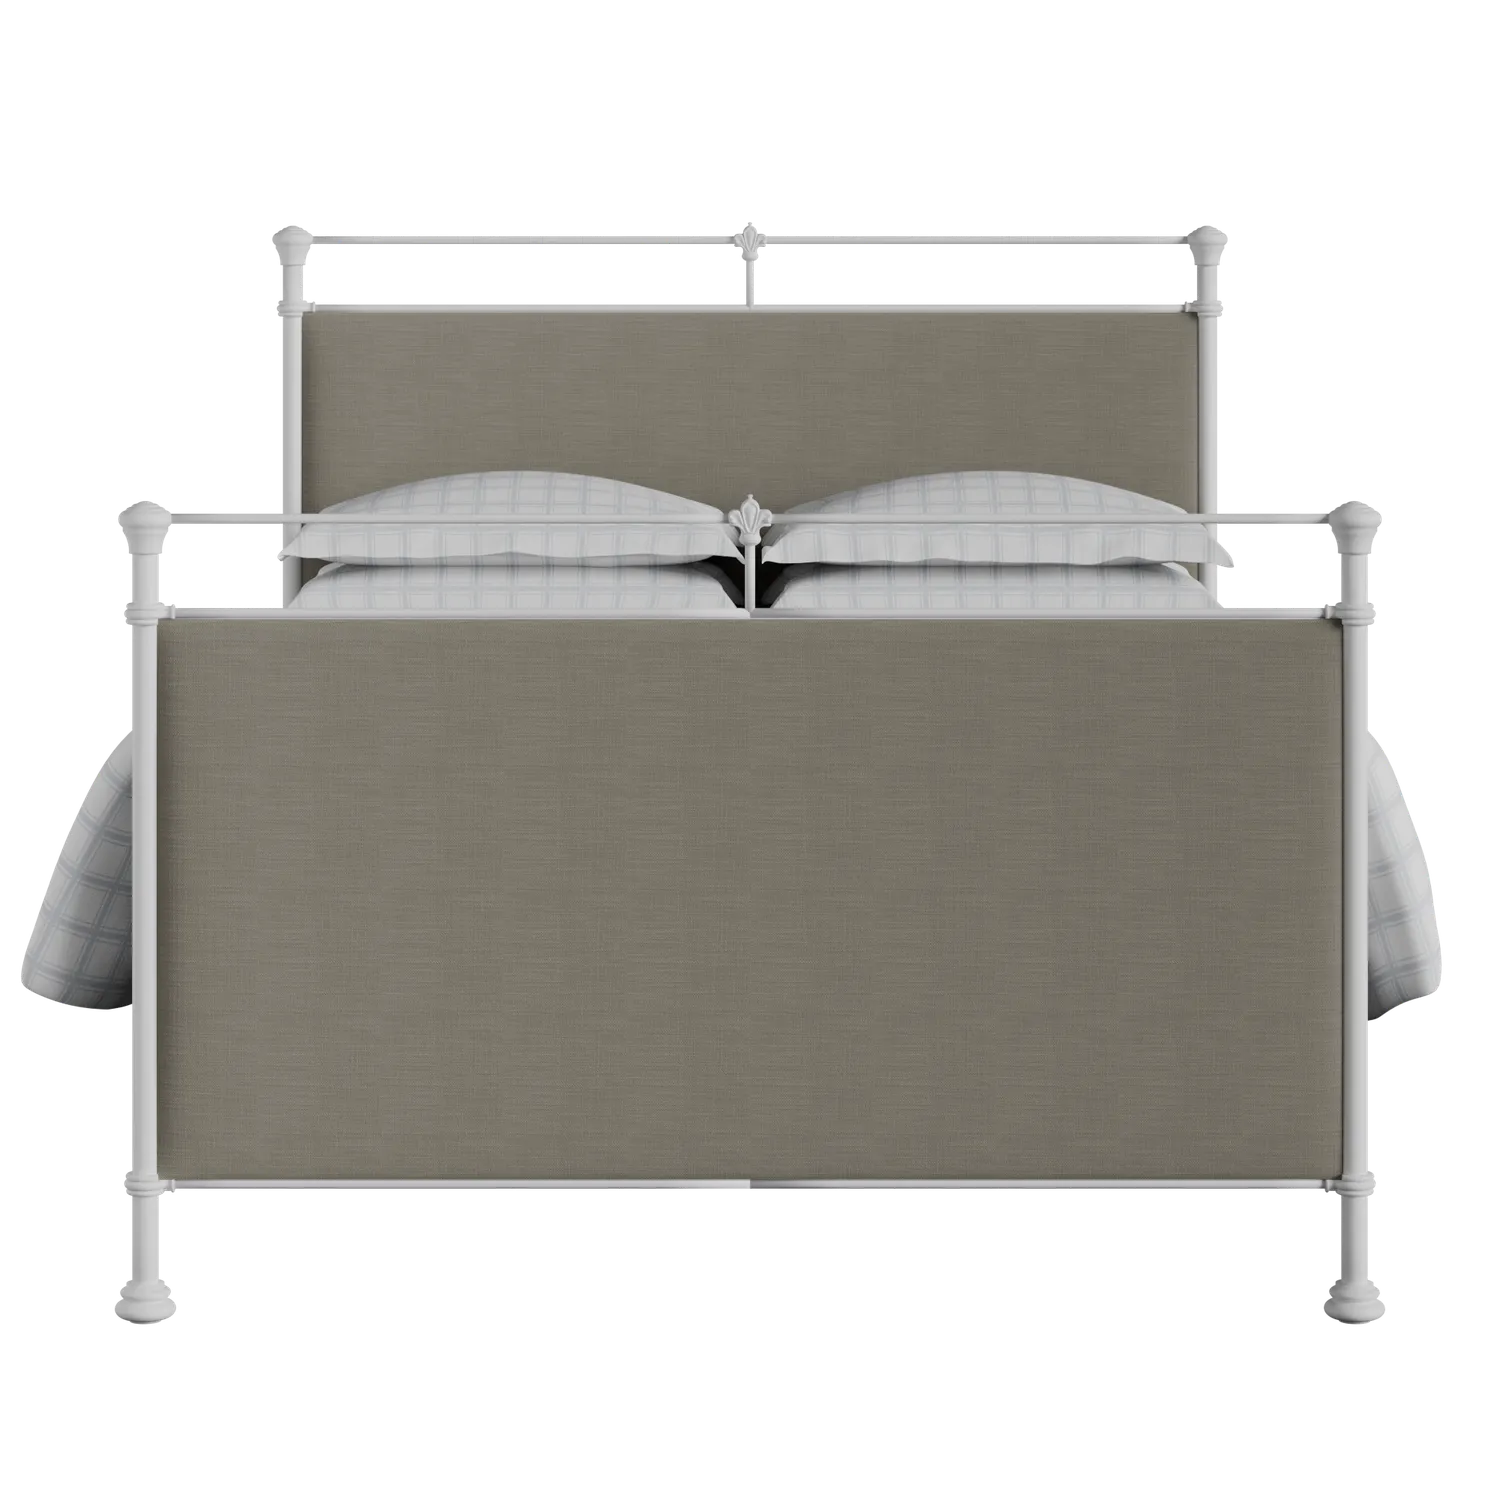 Lille iron/metal upholstered bed in white with grey fabric